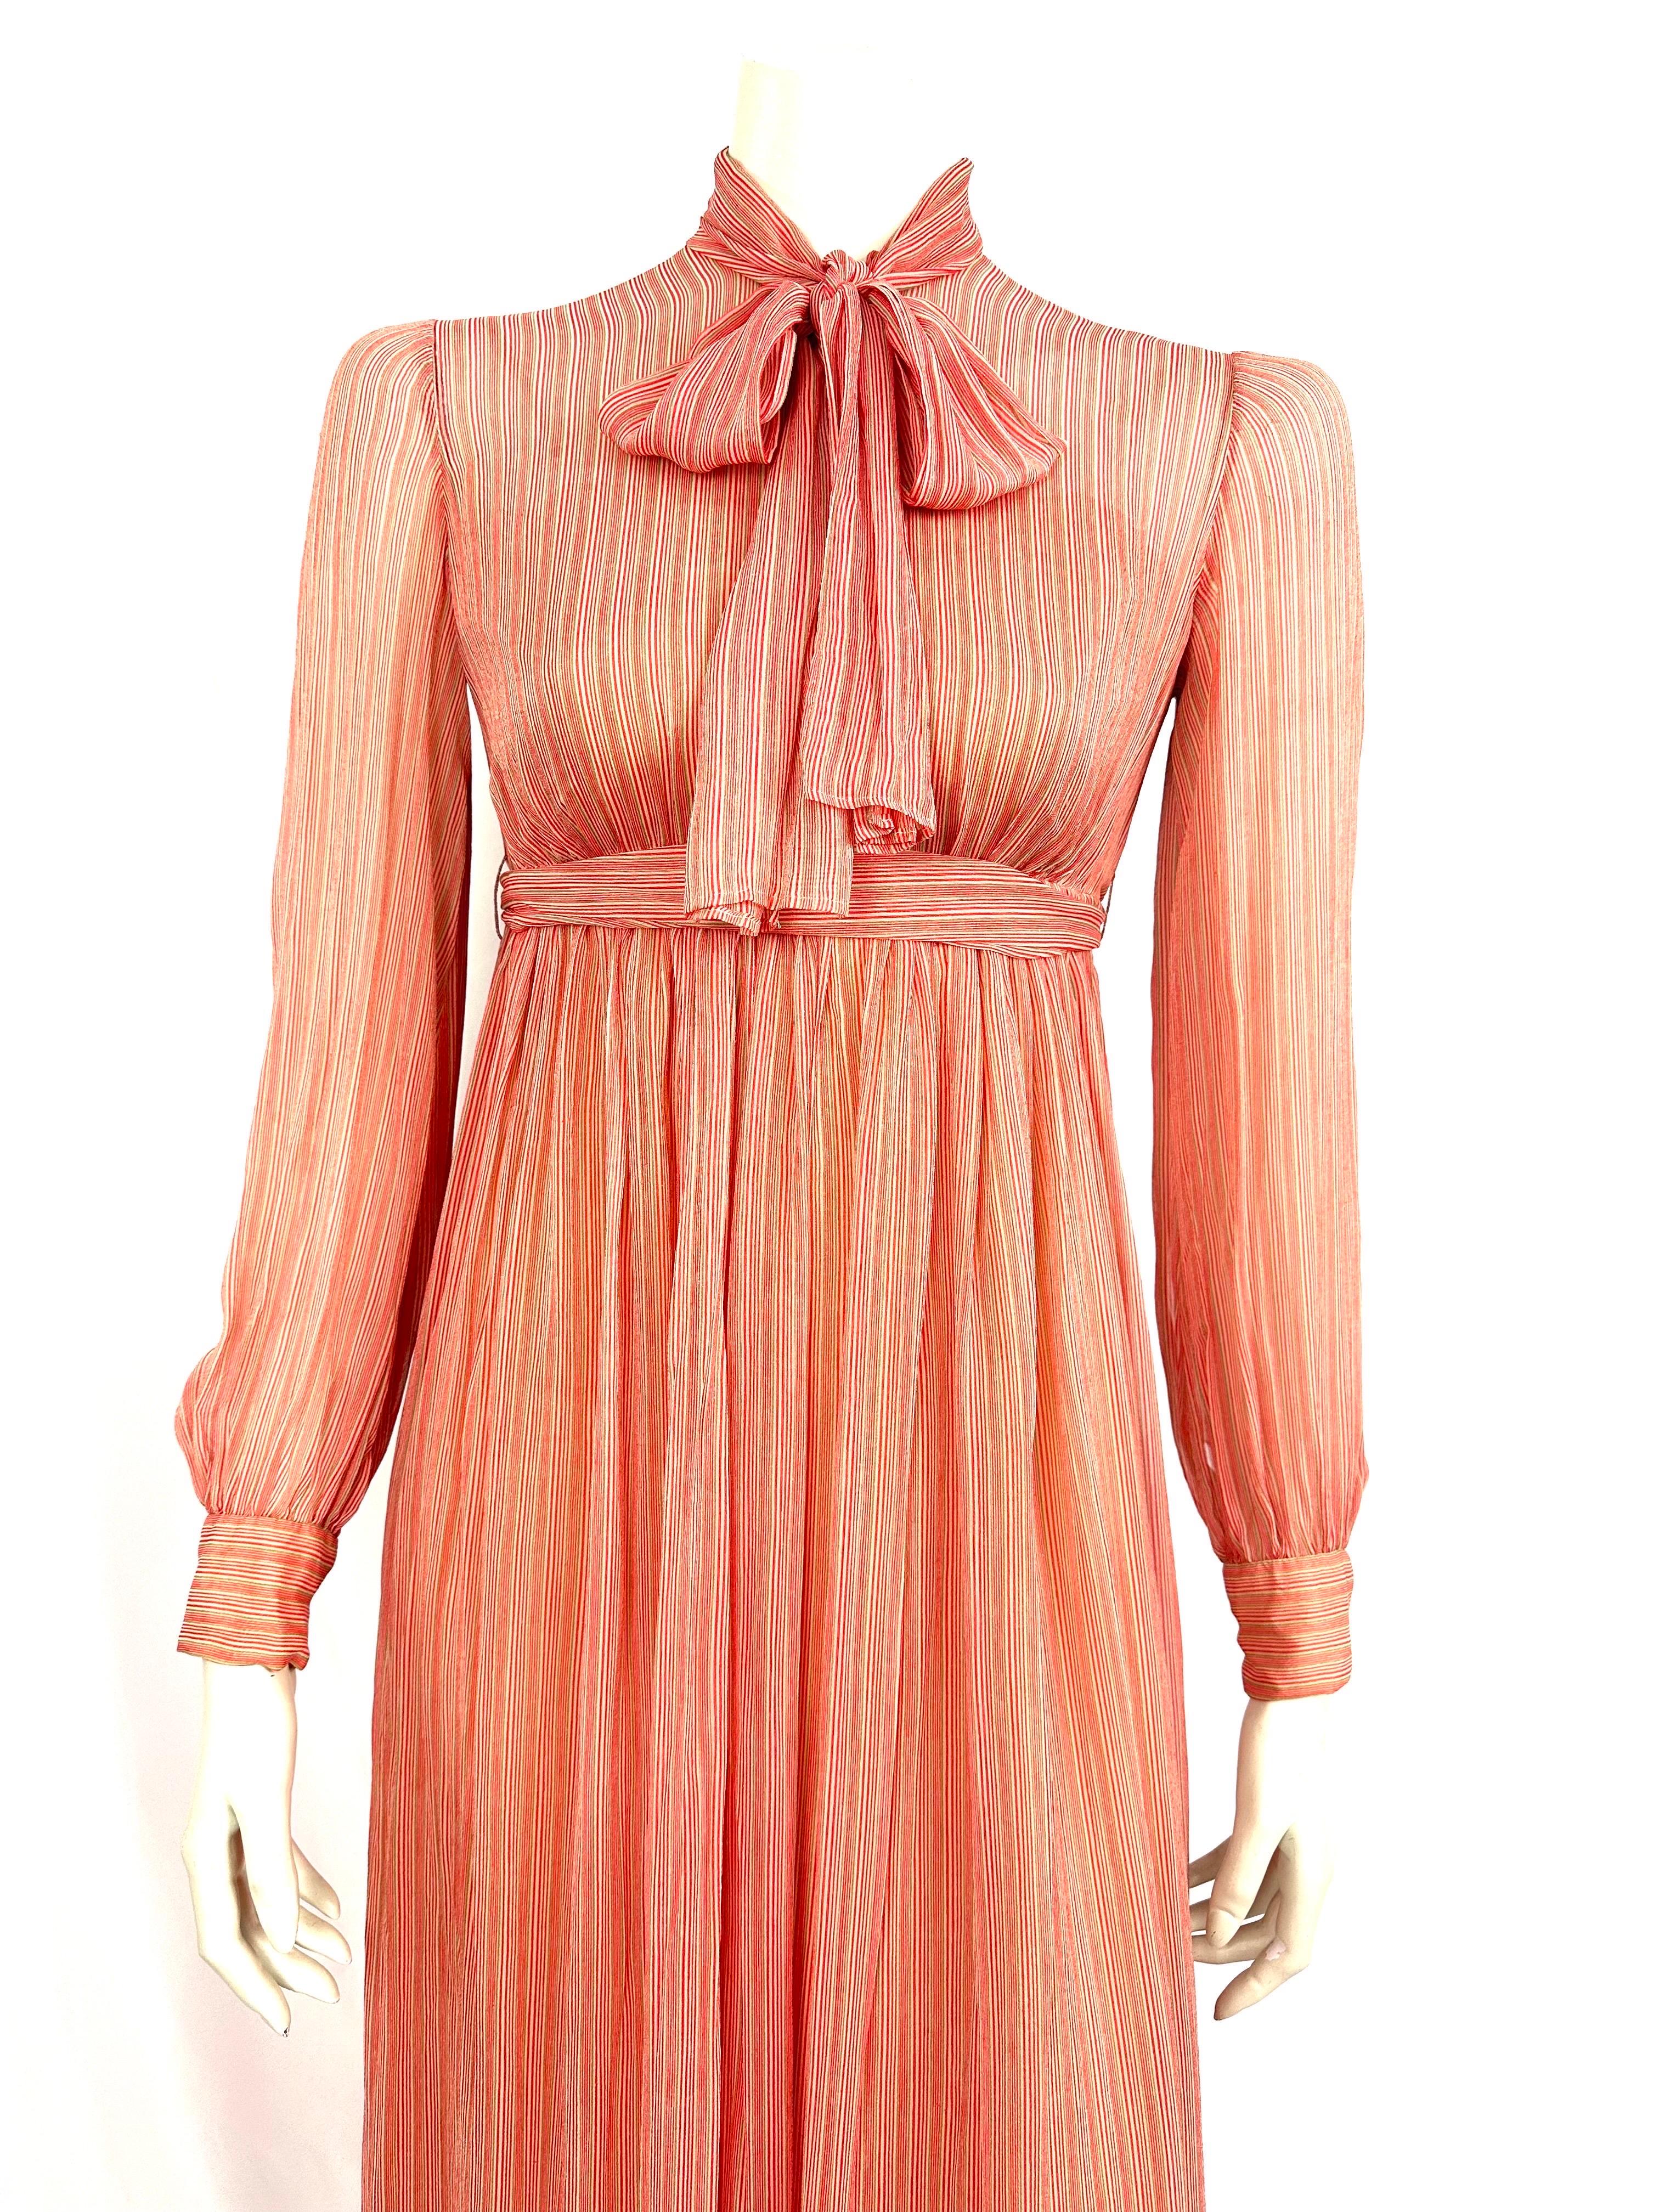 Maxi silk chiffon dress Jean Patou, 
 fine stripes in coral tones.
Removable underdress.
Long back zipper
Ties at waist and lavallière collar.
Missing size and composition labels.
Estimated size 34, please refer to measurements
Shoulder 32cm
Chest